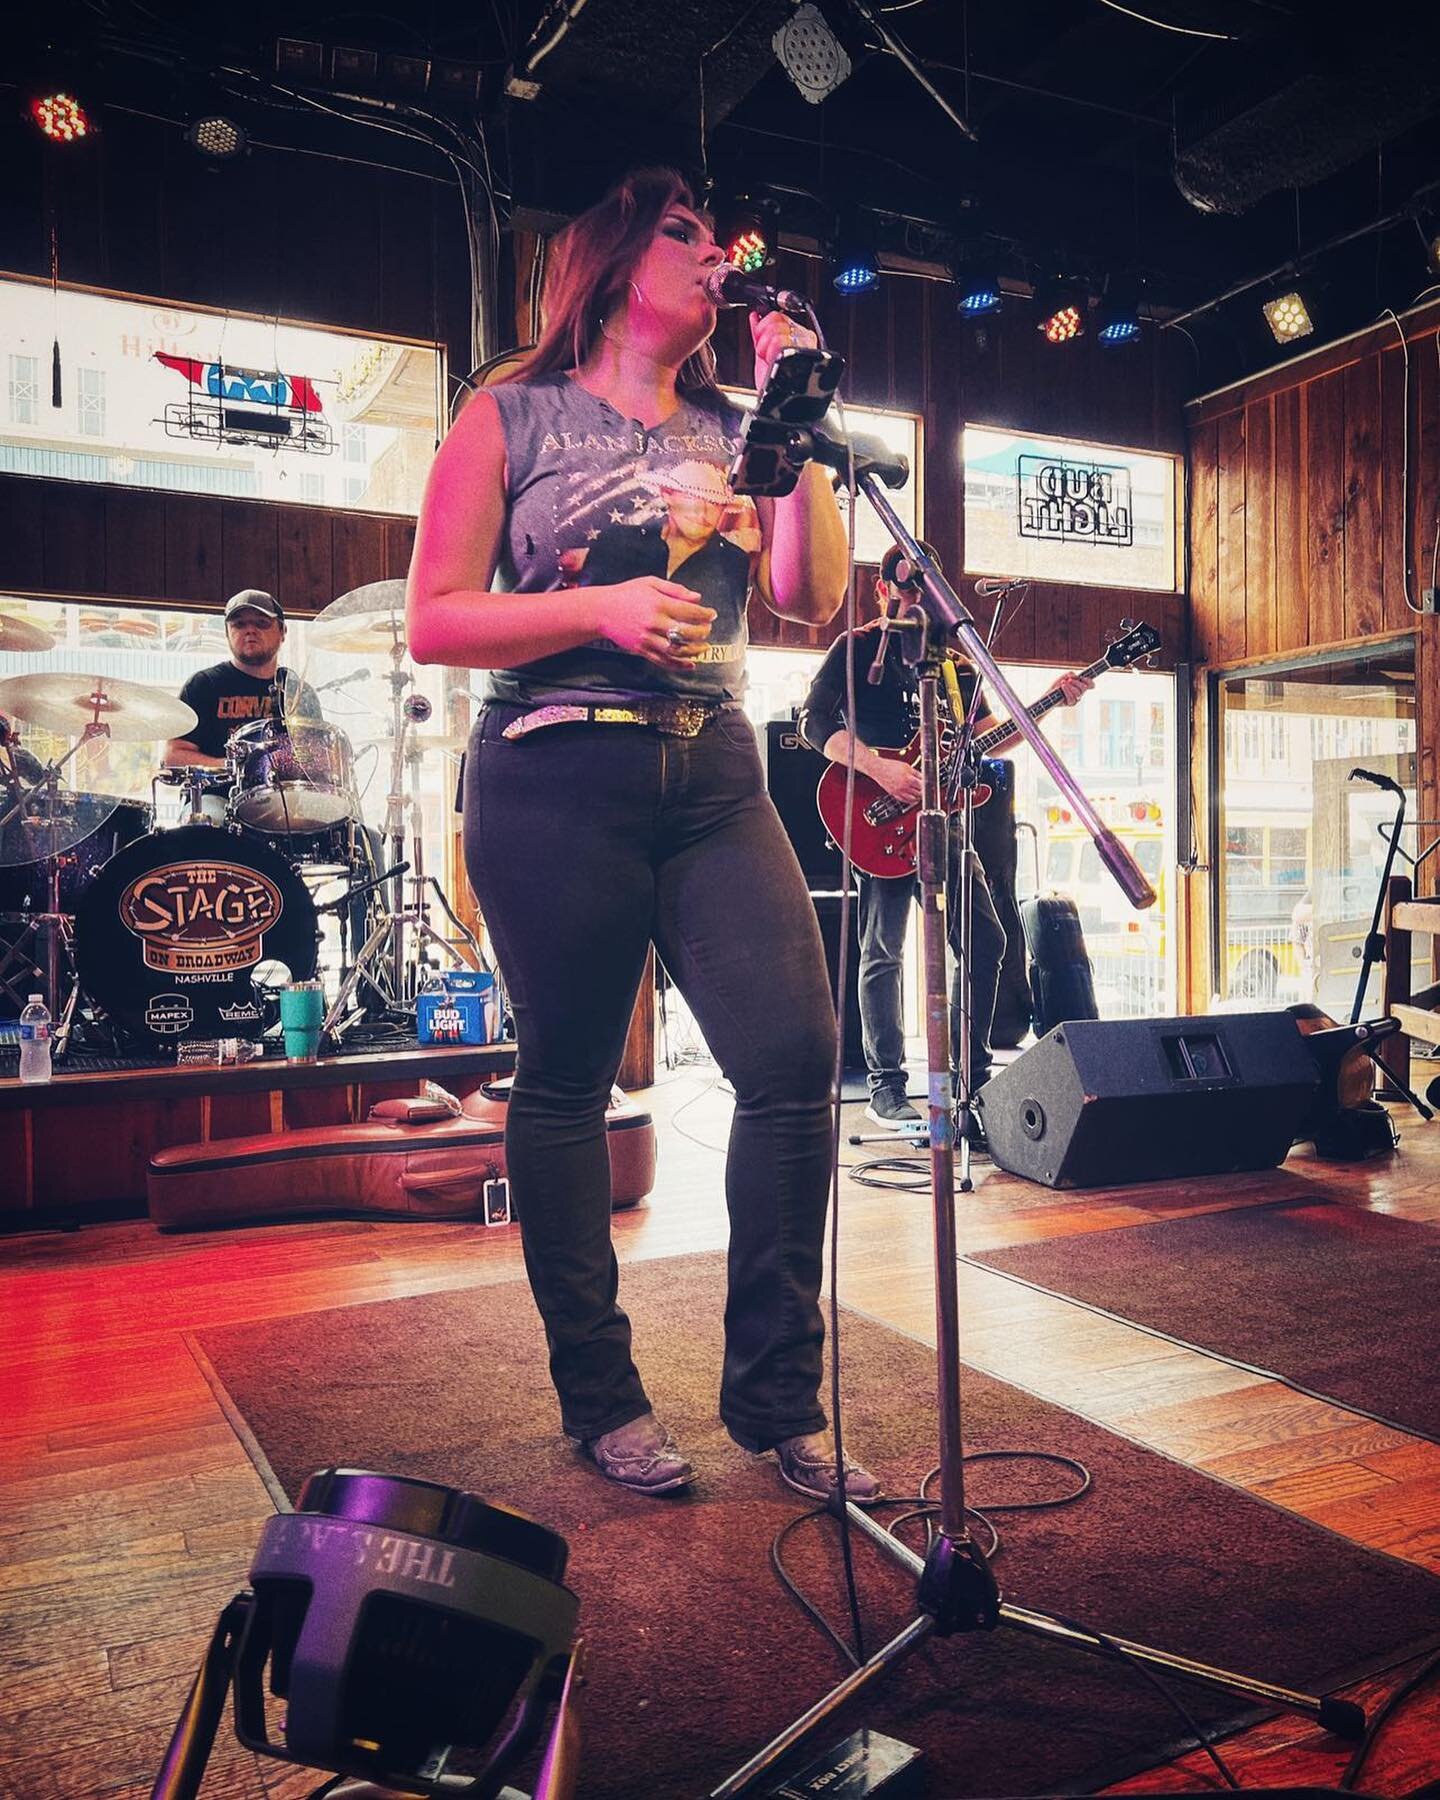 &hellip;livin&rsquo; that honky tonk dream ⭐️🌈
📸: @davidangel13 

#photography #ootd #alanjackson #stagebroadway #broadway #nashville #madeintn #countrymusic #performer #country #female #singersongwriter #newmusic #downtown #ohiogirl #corralboots #